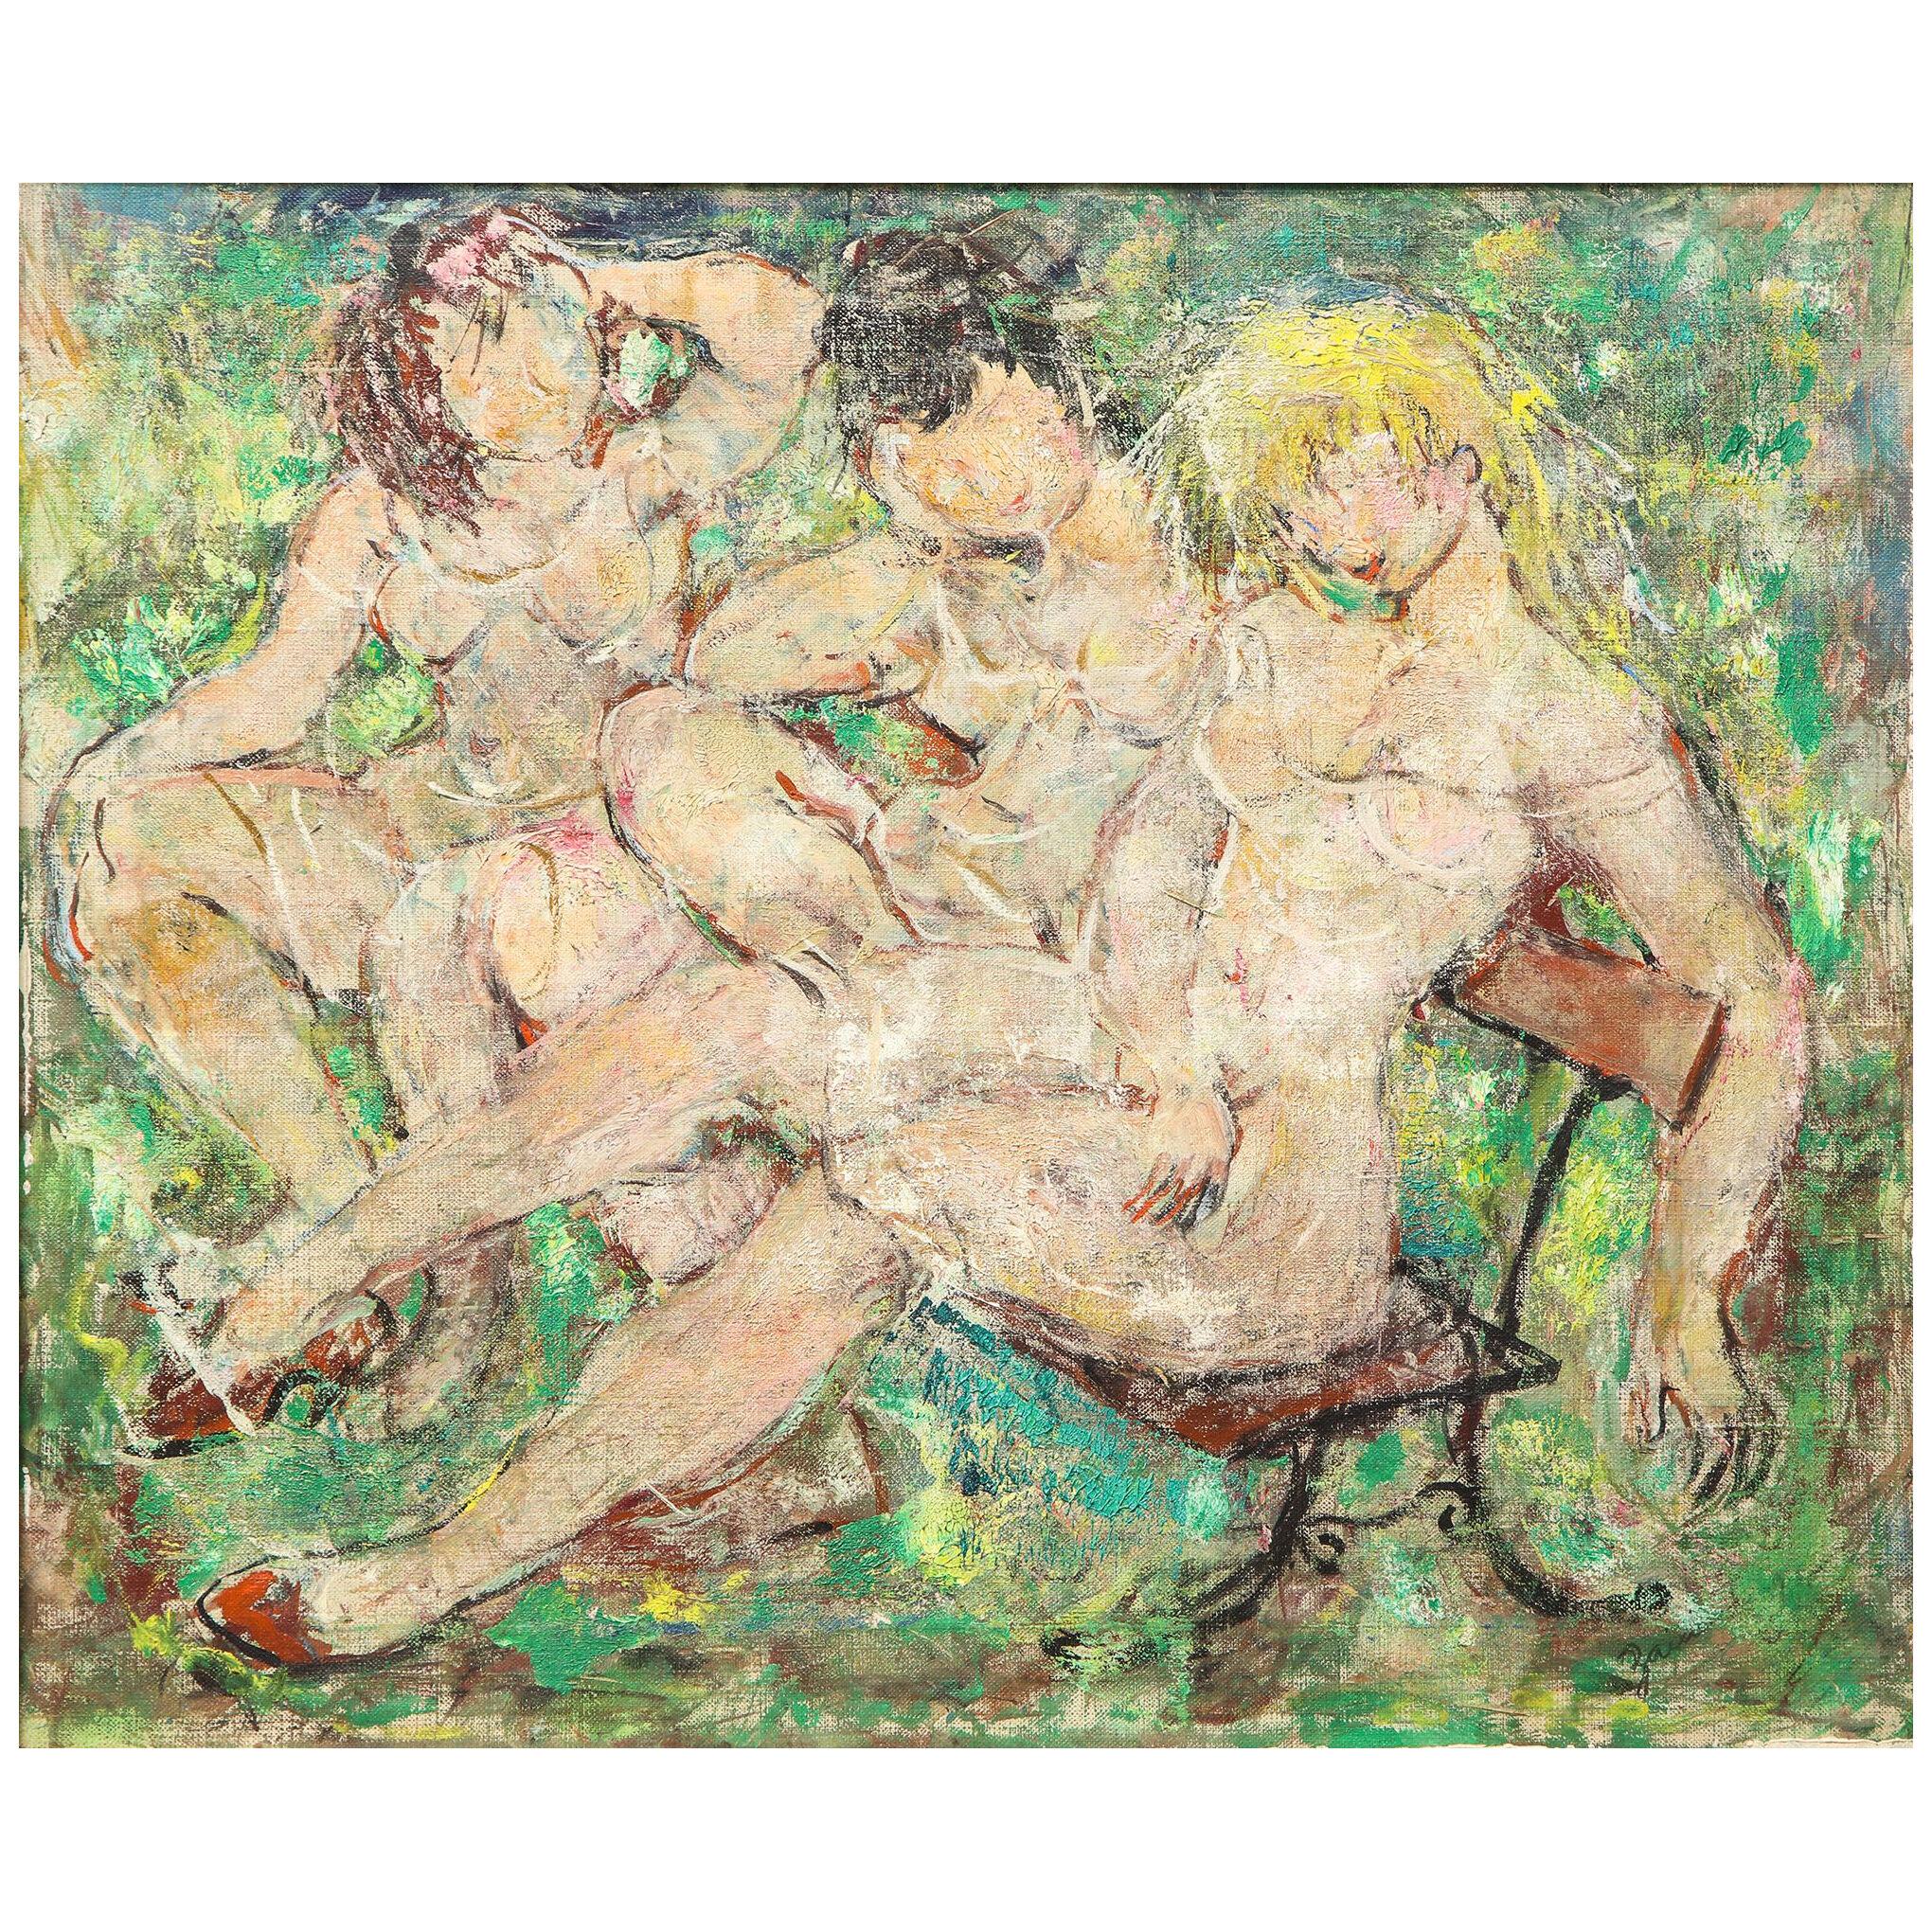 Three Nudes on a Park Bench Oil on Canvas